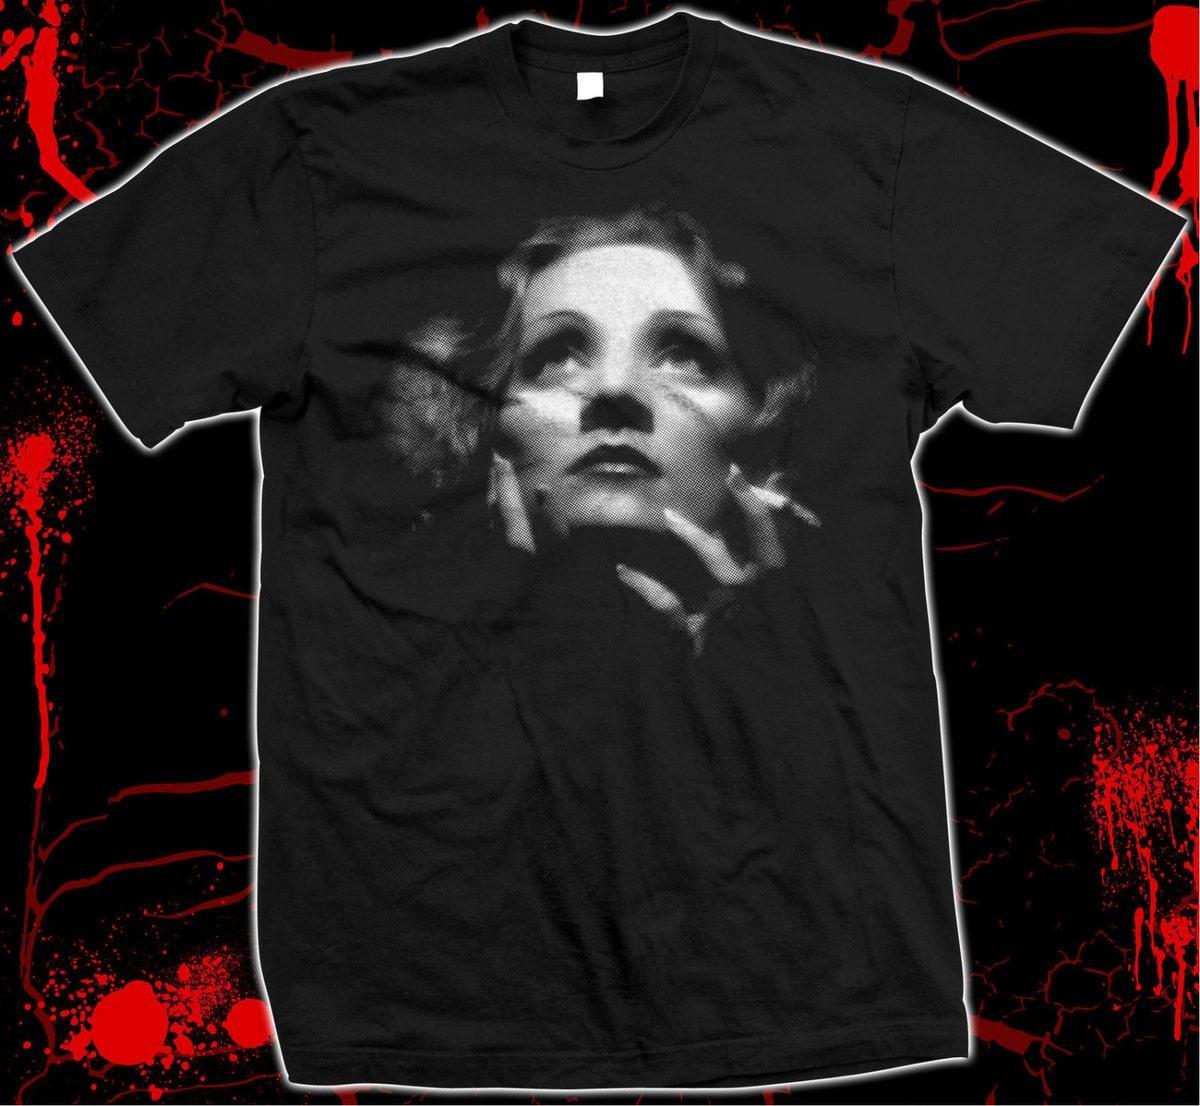 Butthole Surfers Member Gibby Haynes T-shirt Best Fans Gifts